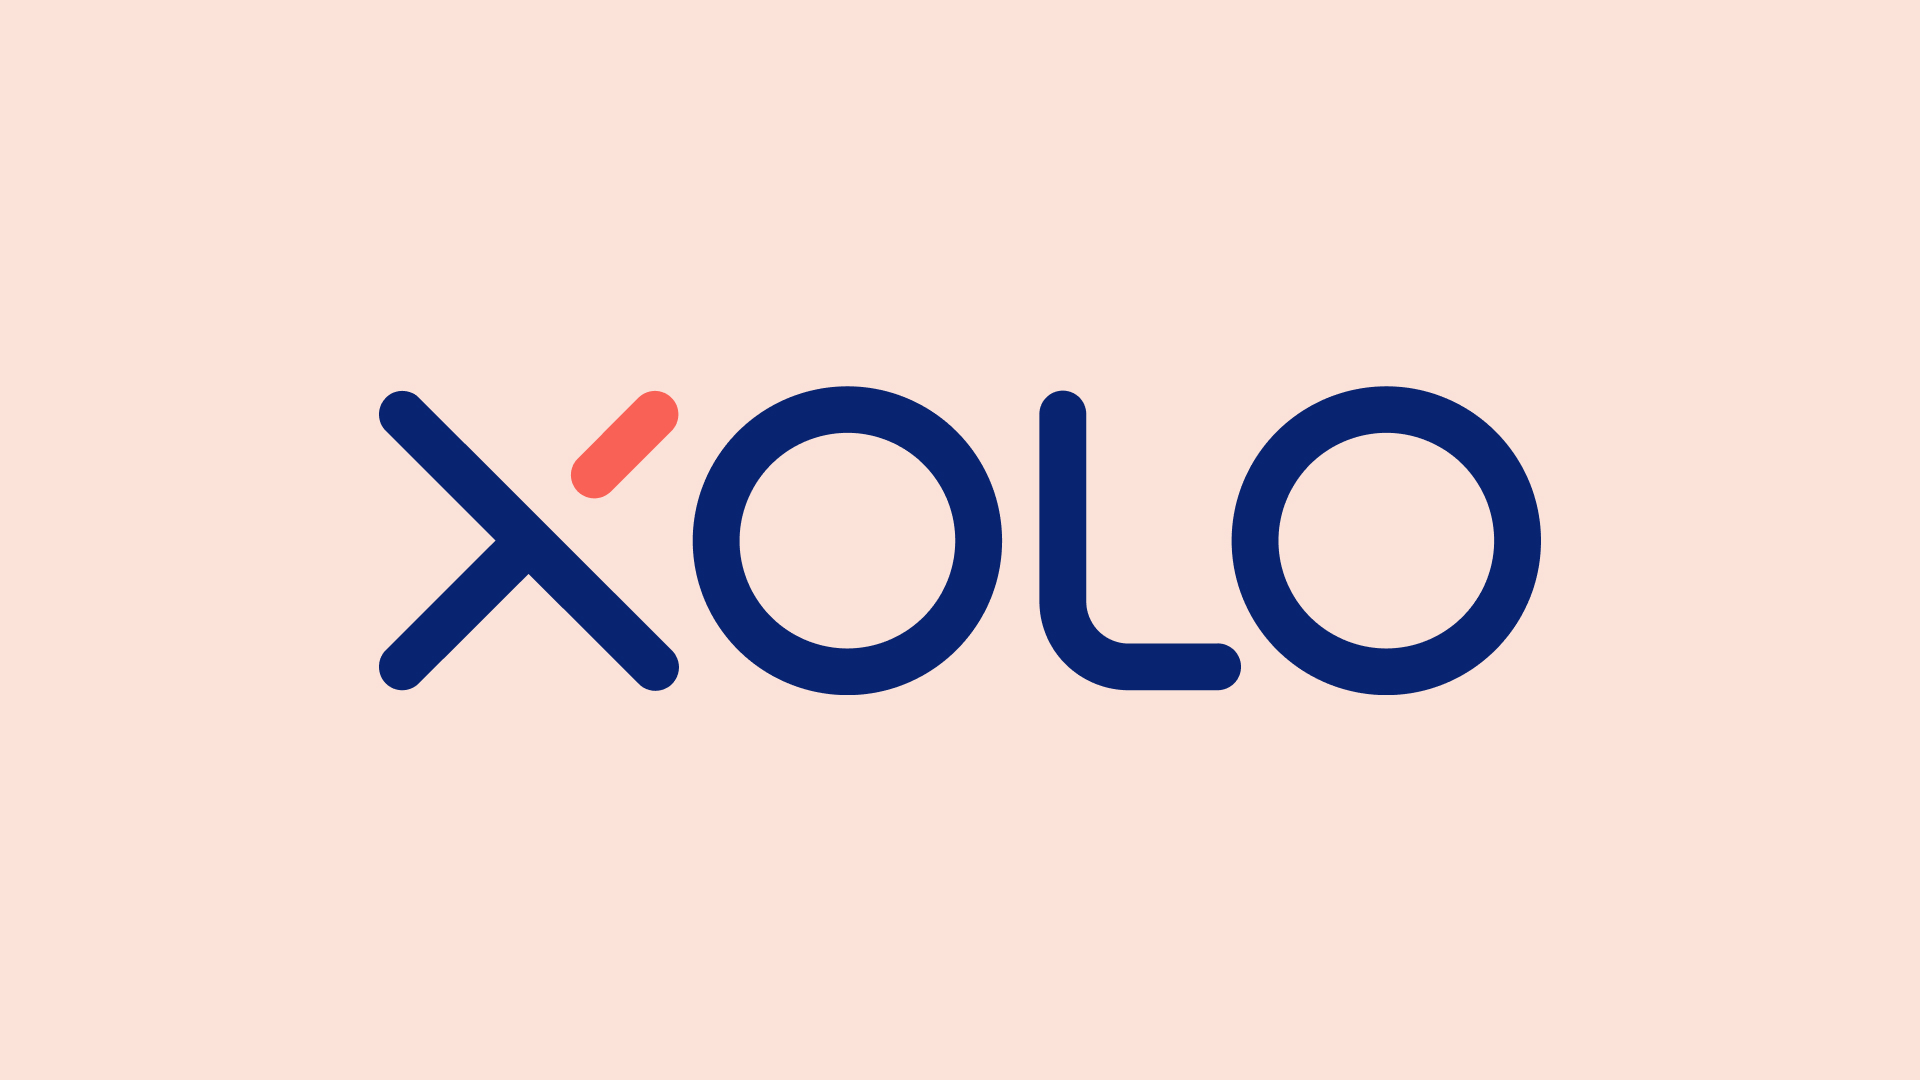 Xolo survey results & recruiting campaign for Spain